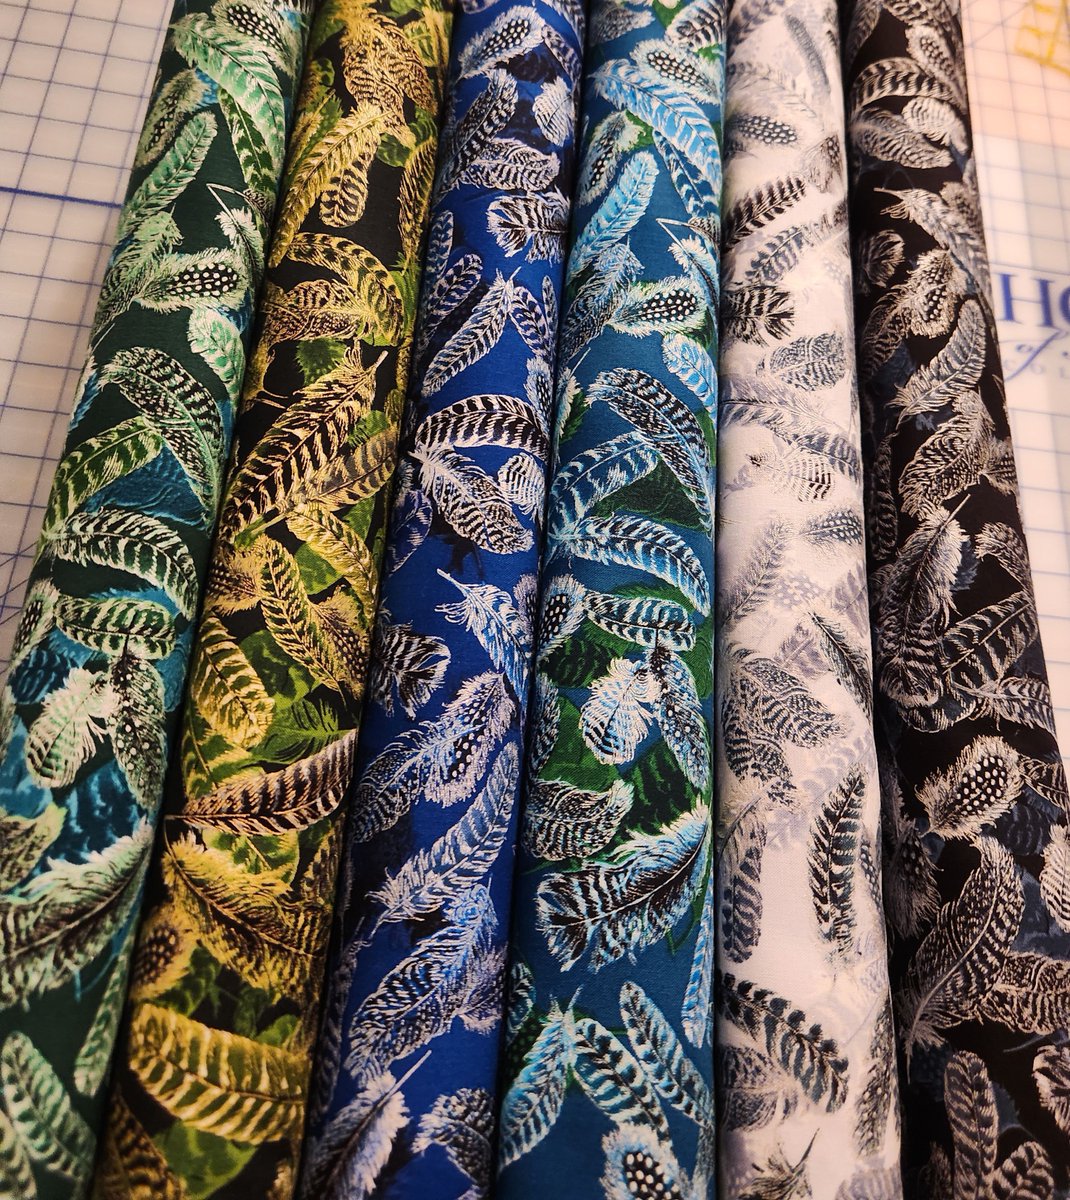 #'Beautiful fabric for #quilting! Check out our latest collection of #vibrant, #high-quality quilting fabrics. Create stunning quilts that will be cherished for years to come. #quilting #fabriclove ''' buff.ly/4744sUh buff.ly/46GVxHG